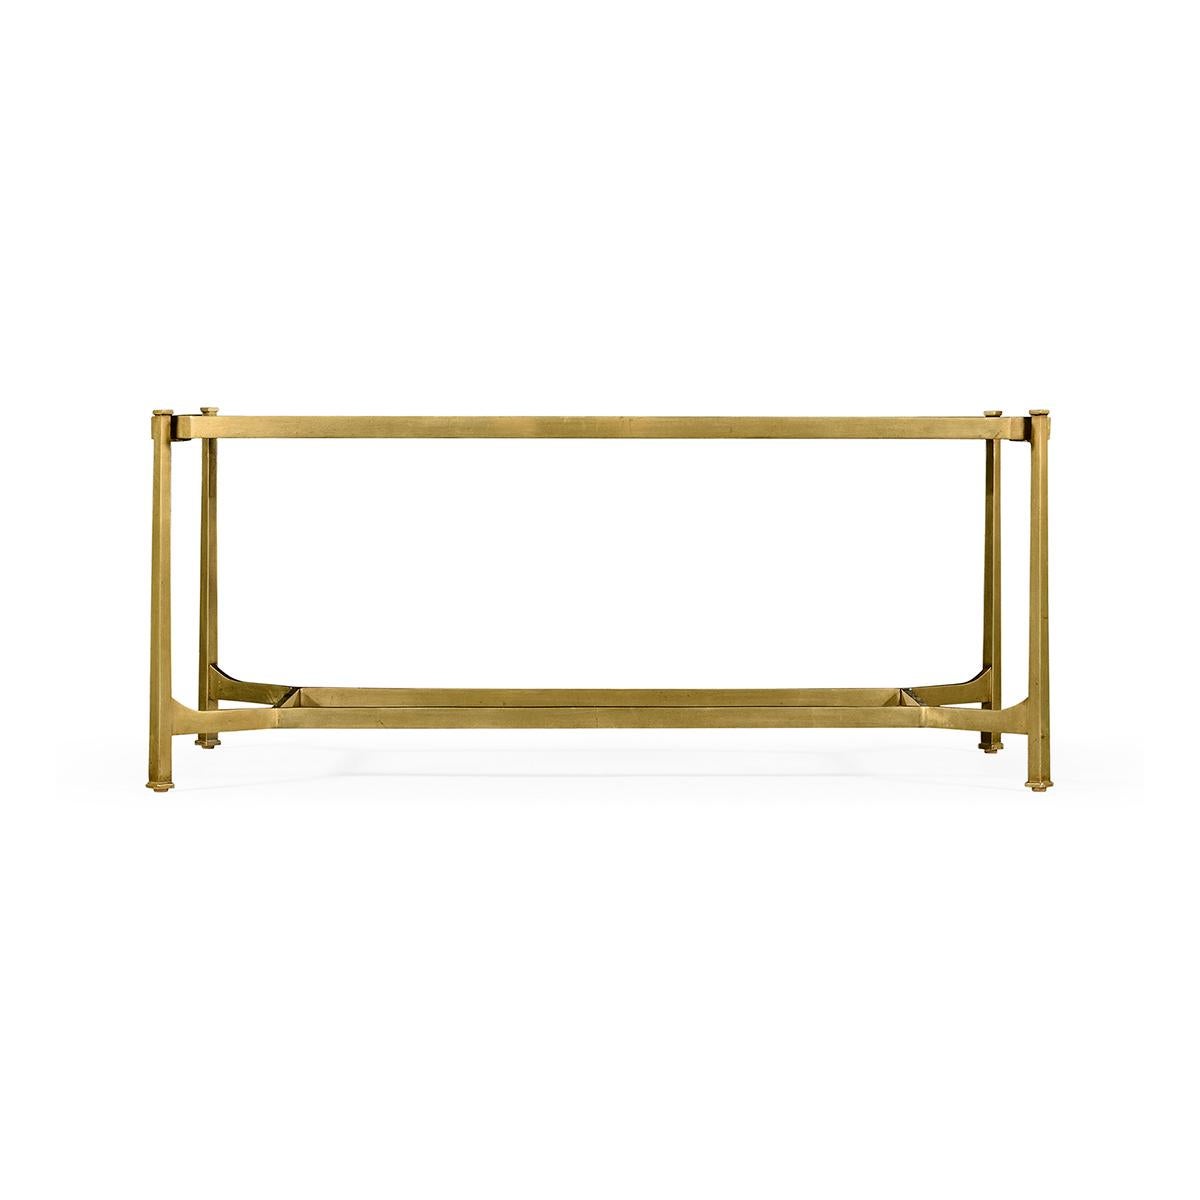 Art Deco Style Gilt cocktail table, wrought iron frame with an antique gilded finish and églomisé rectangular top set on an openwork stretcher base. 

Dimensions: 48